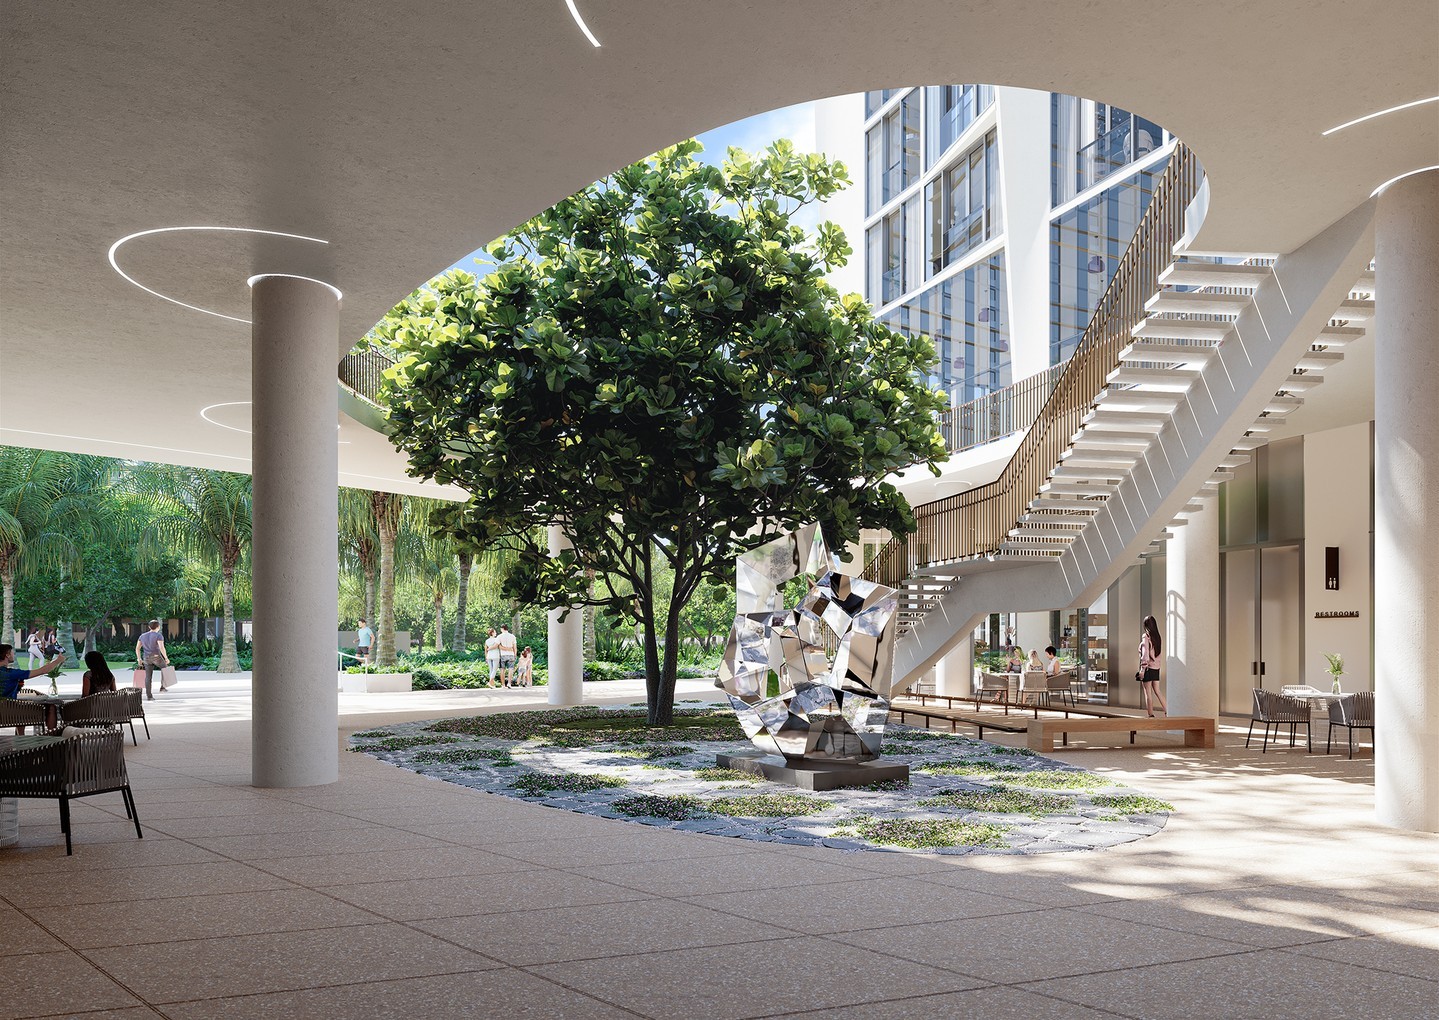 At Kōʻula, expansive open-air spaces create a seamless transition from the beautiful outside to the beautiful inside. Learn more about the thoughtfully designed spaces of Kōʻula in our link in bio.